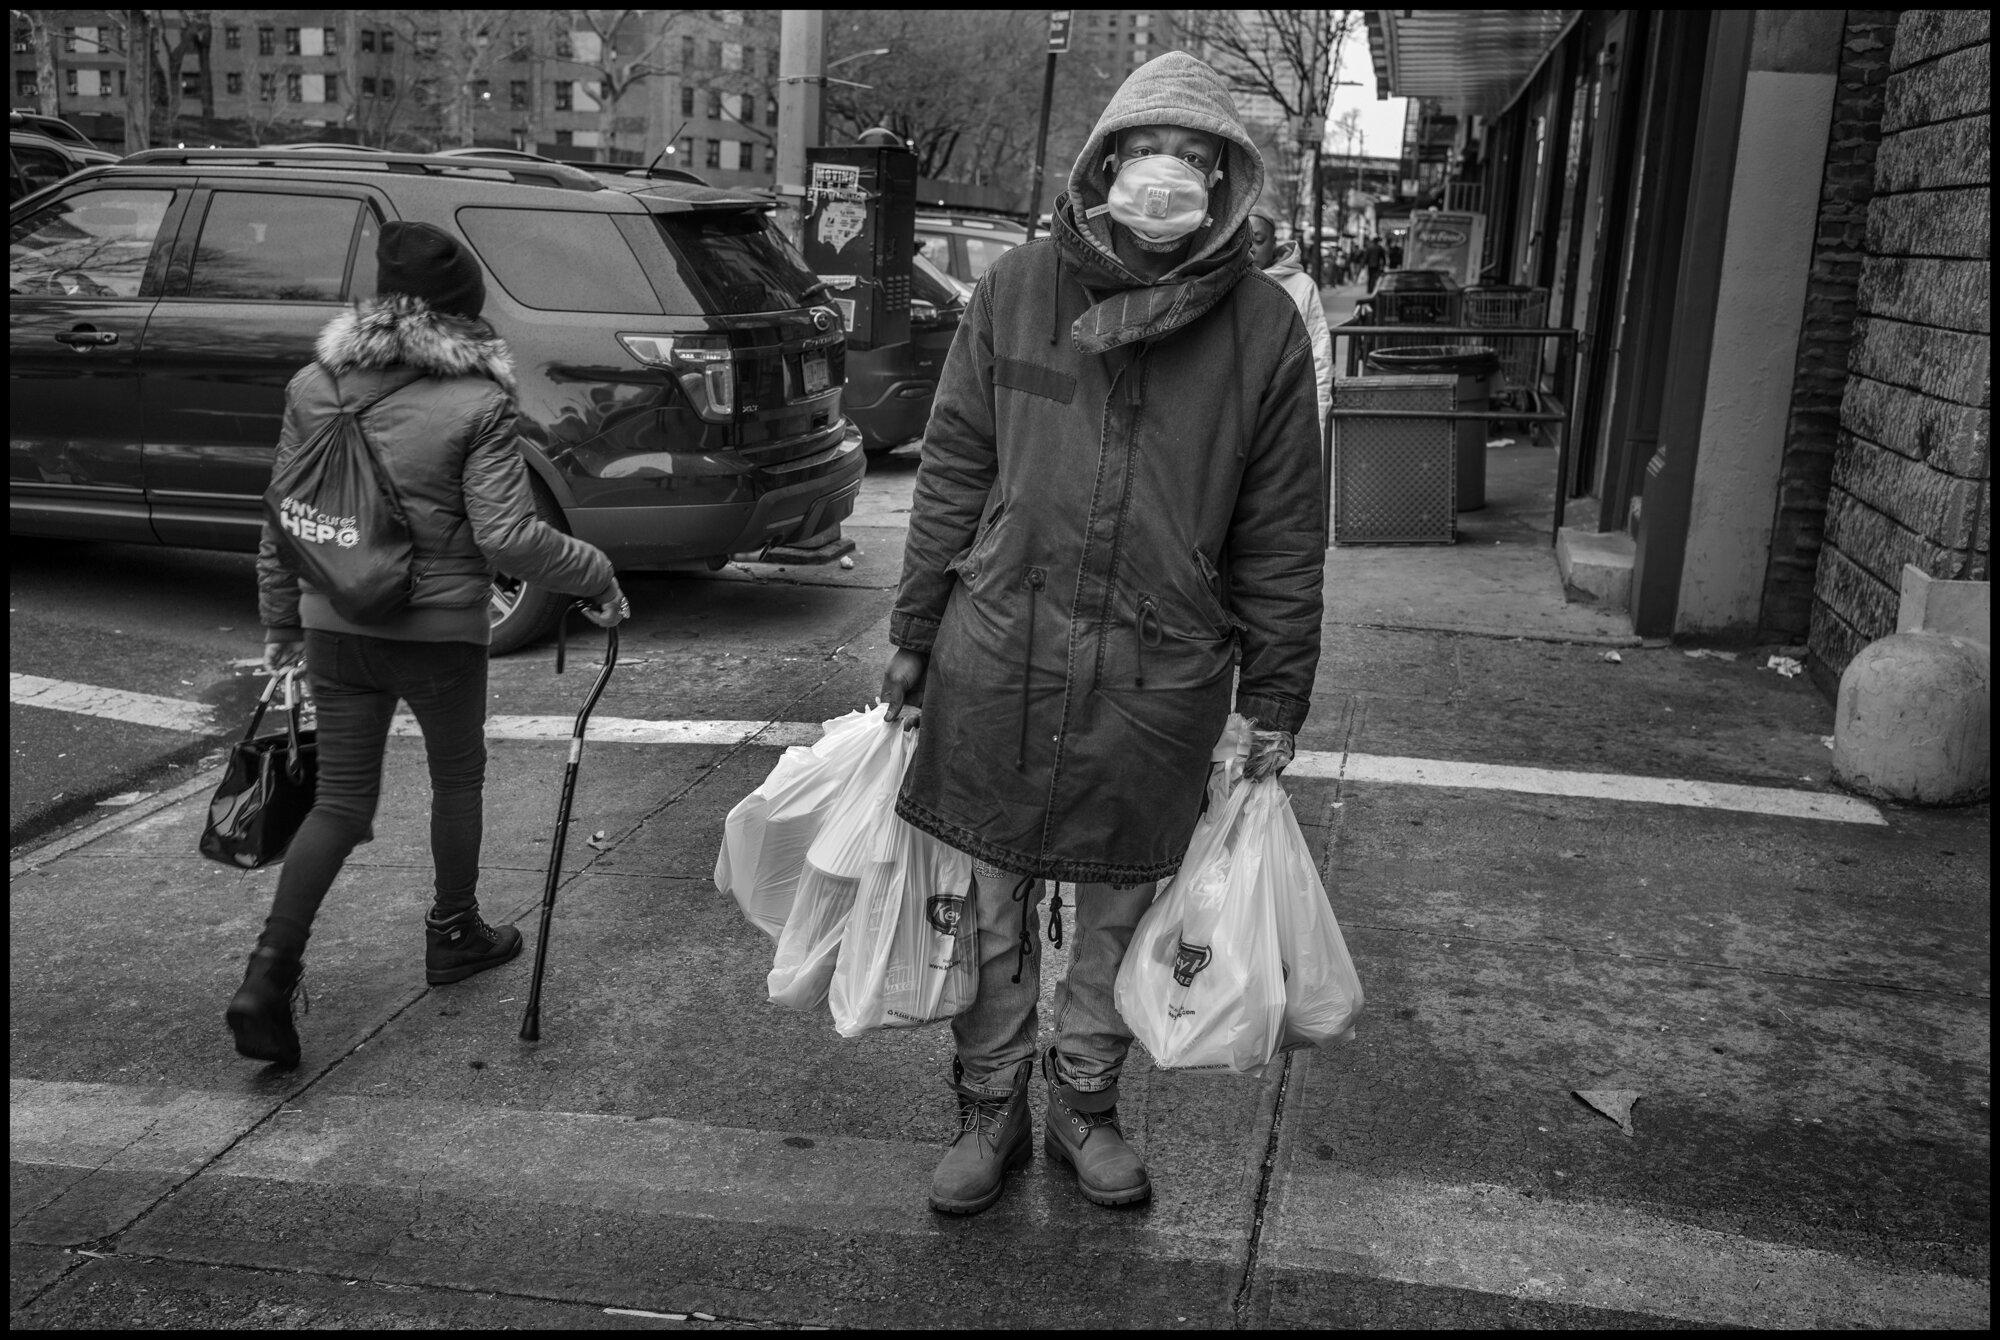  Ernest, 45, returns home from the grocery stores with food, on 125th Street in Harlem.   March 28, 2020. © Peter Turnley.   ID# 06-004 